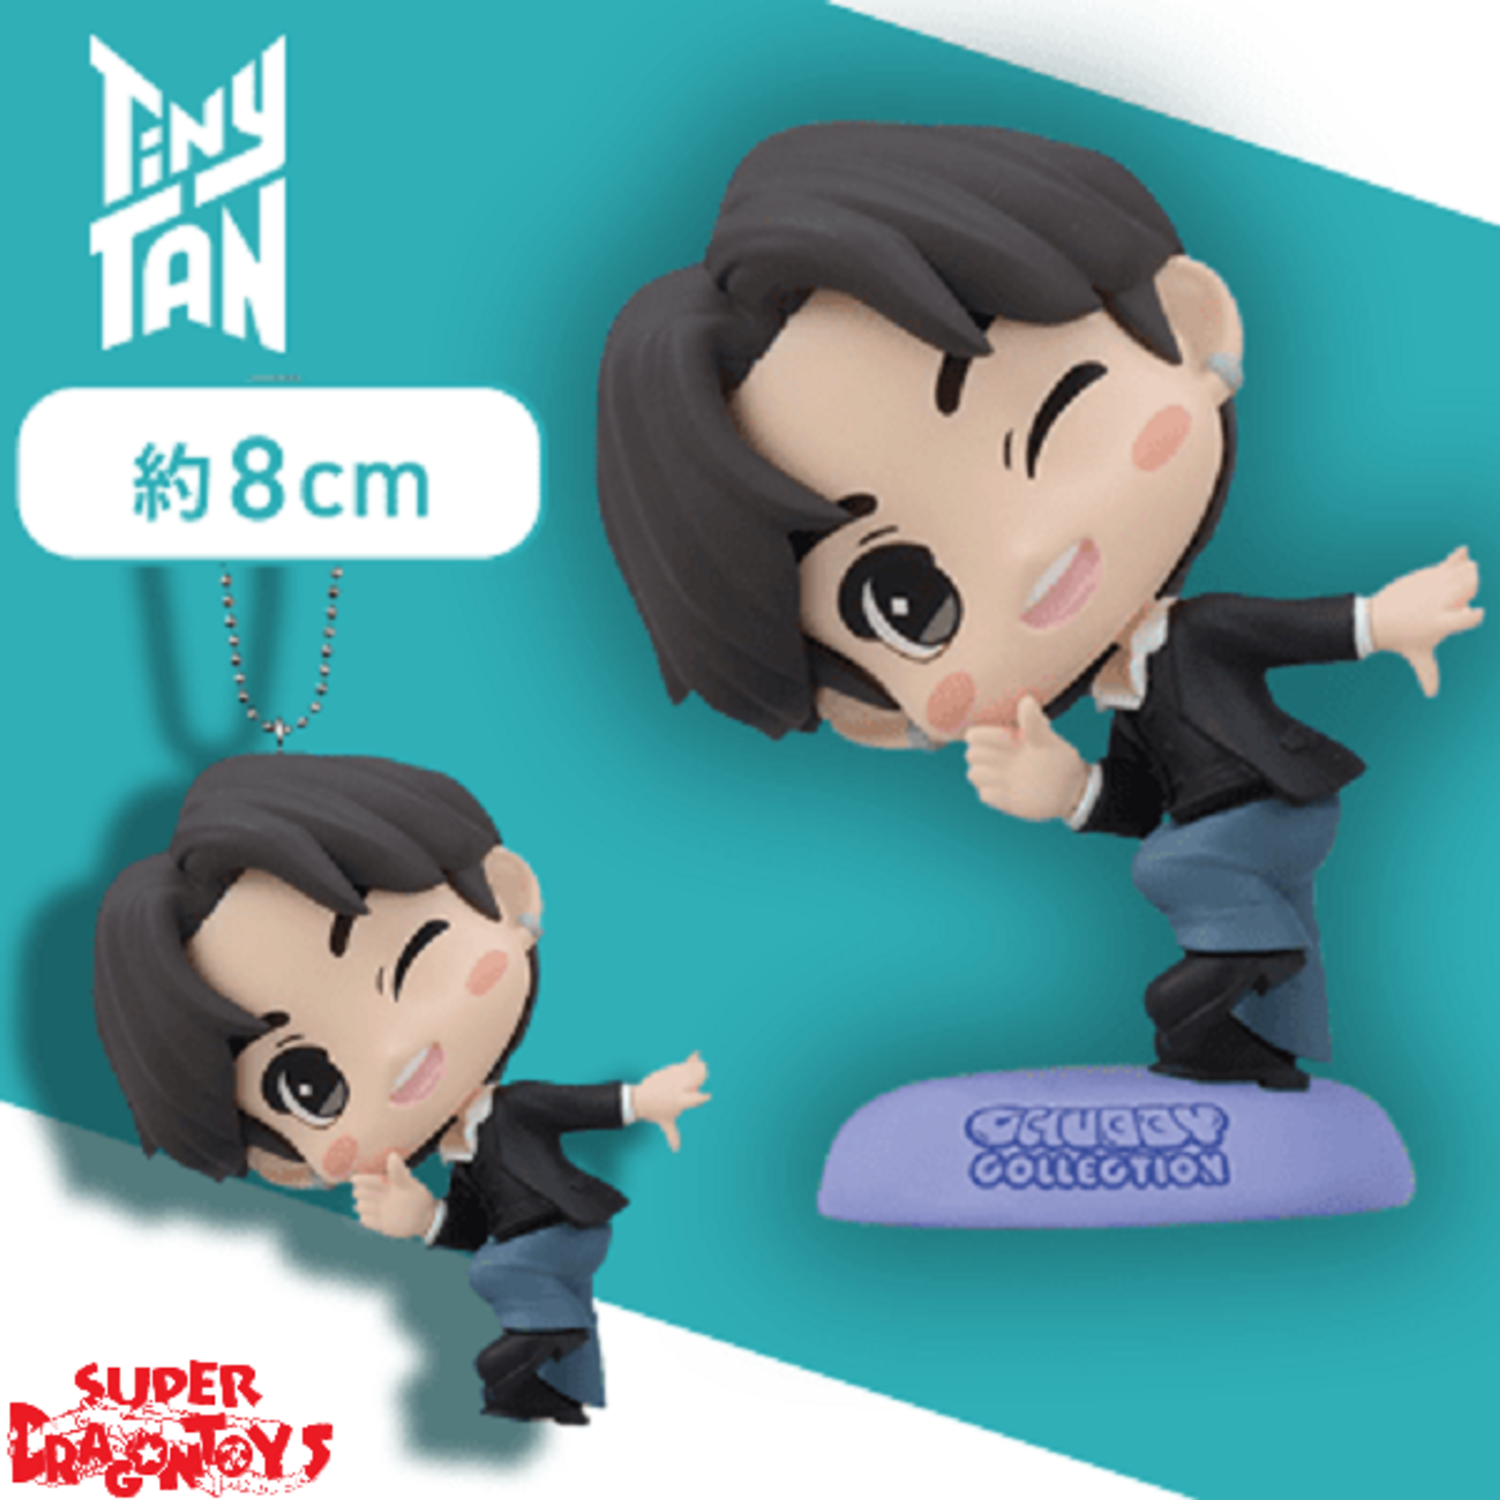 Bts Tinytan Chubby Collection Suga Special Figure Superdragontoys 3749